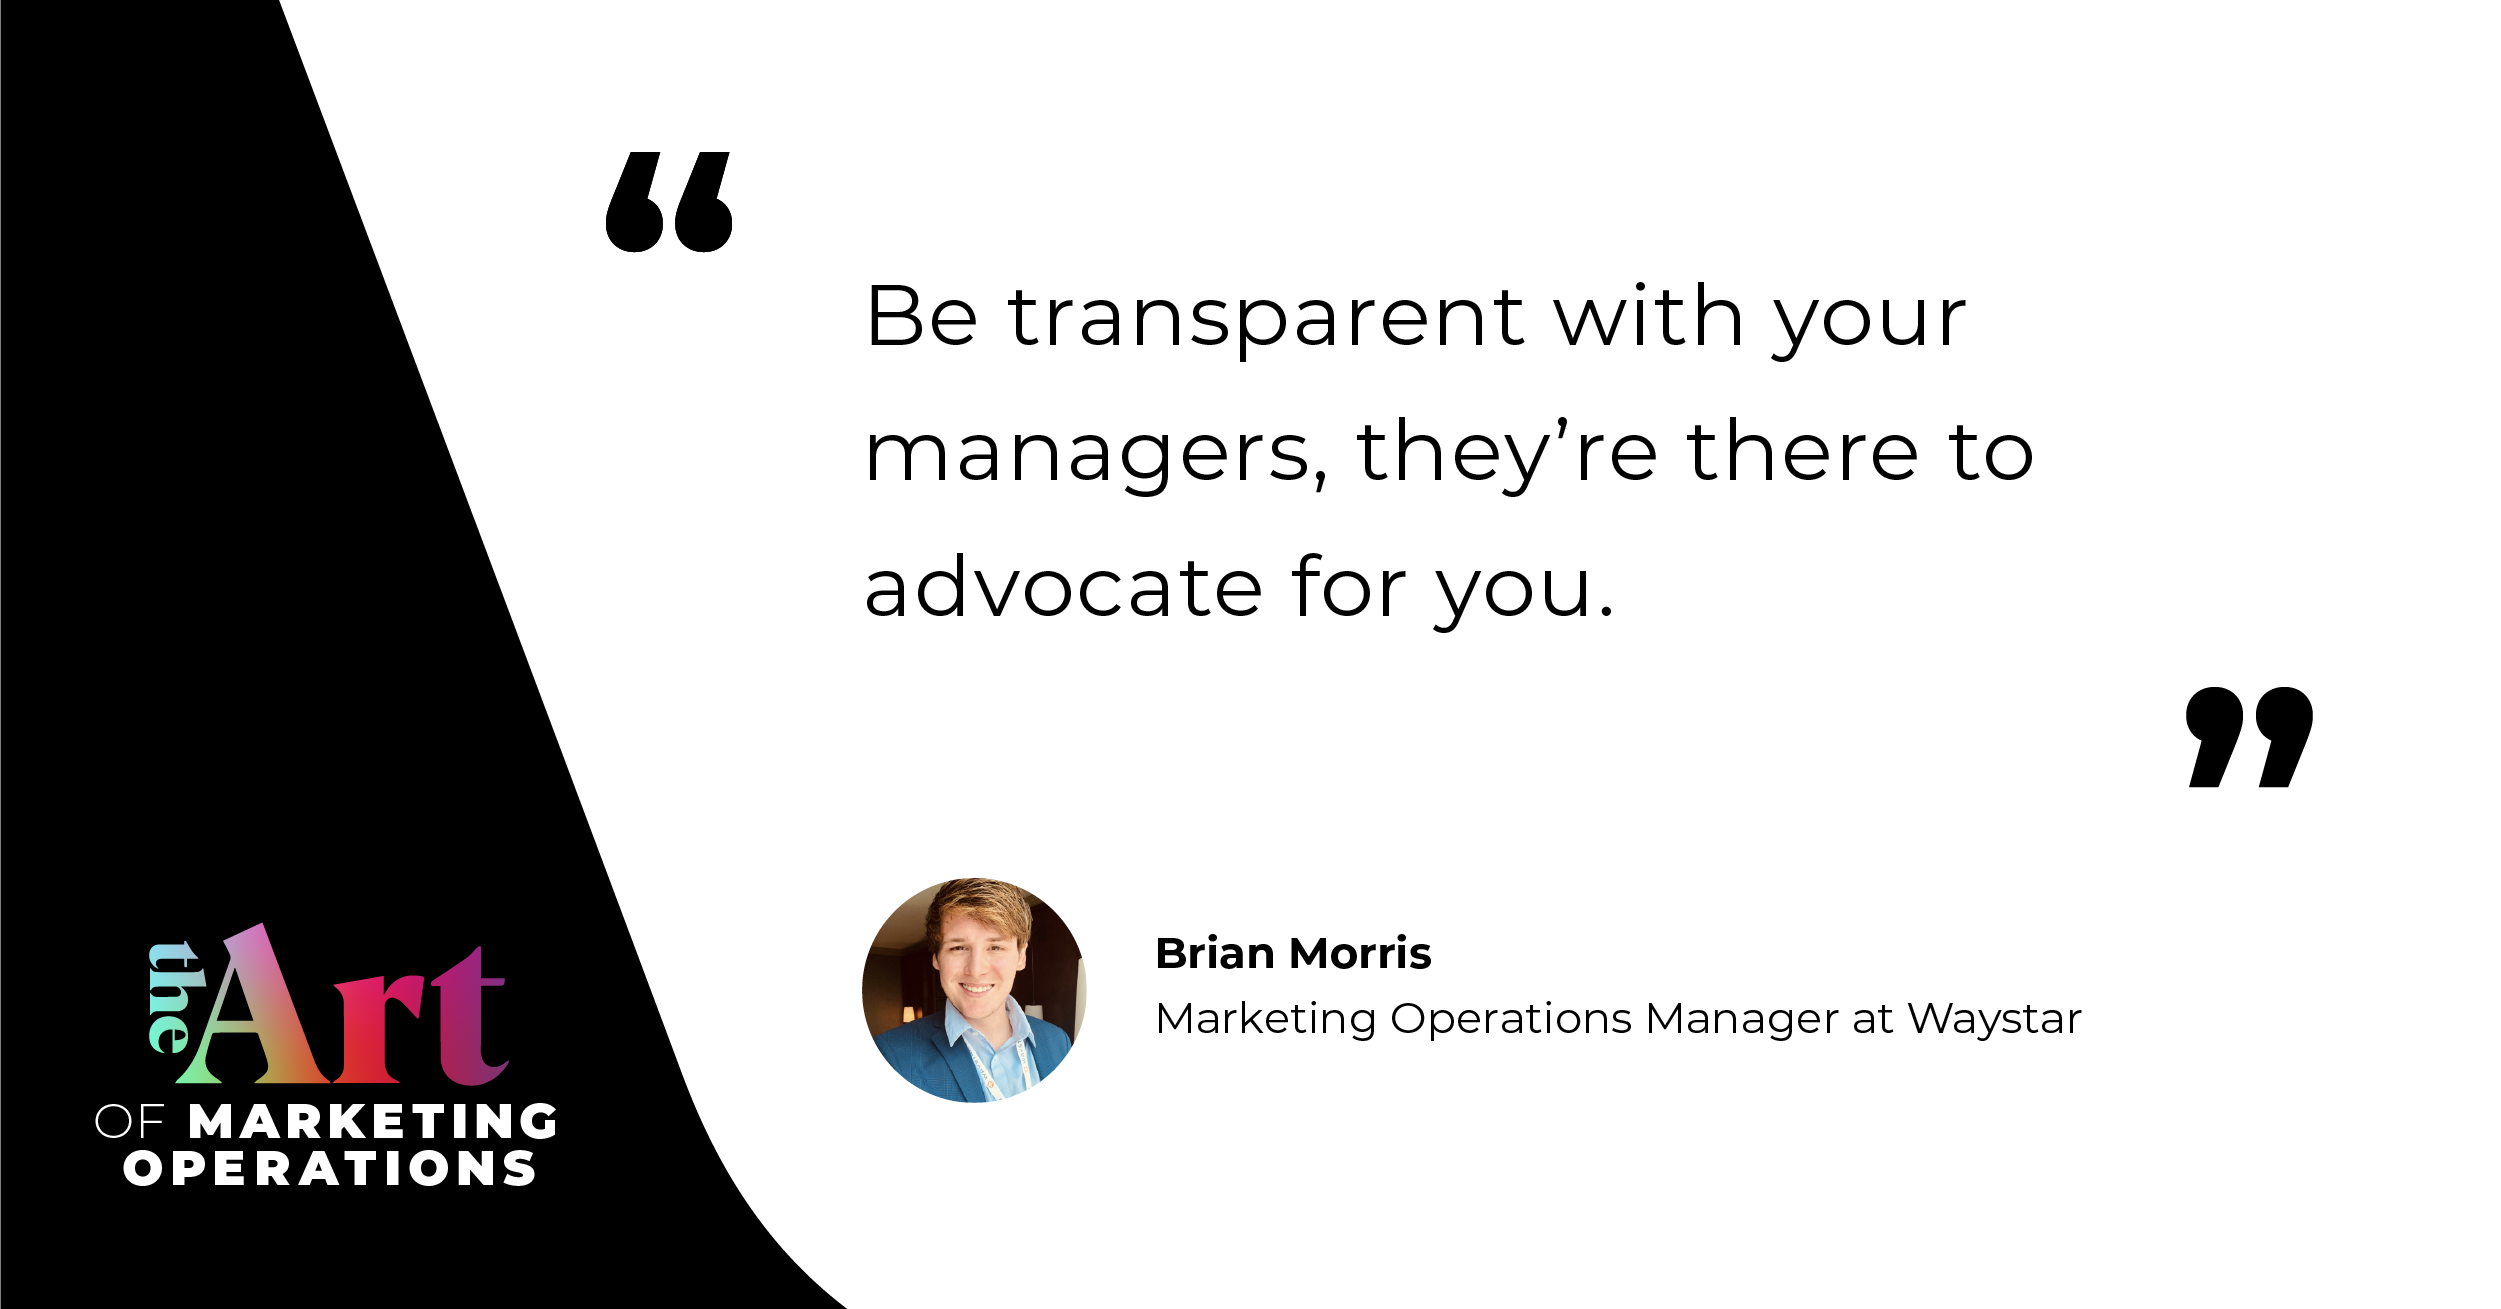 “Be transparent with your managers, they're there to advocate for you.” — Brian Morris